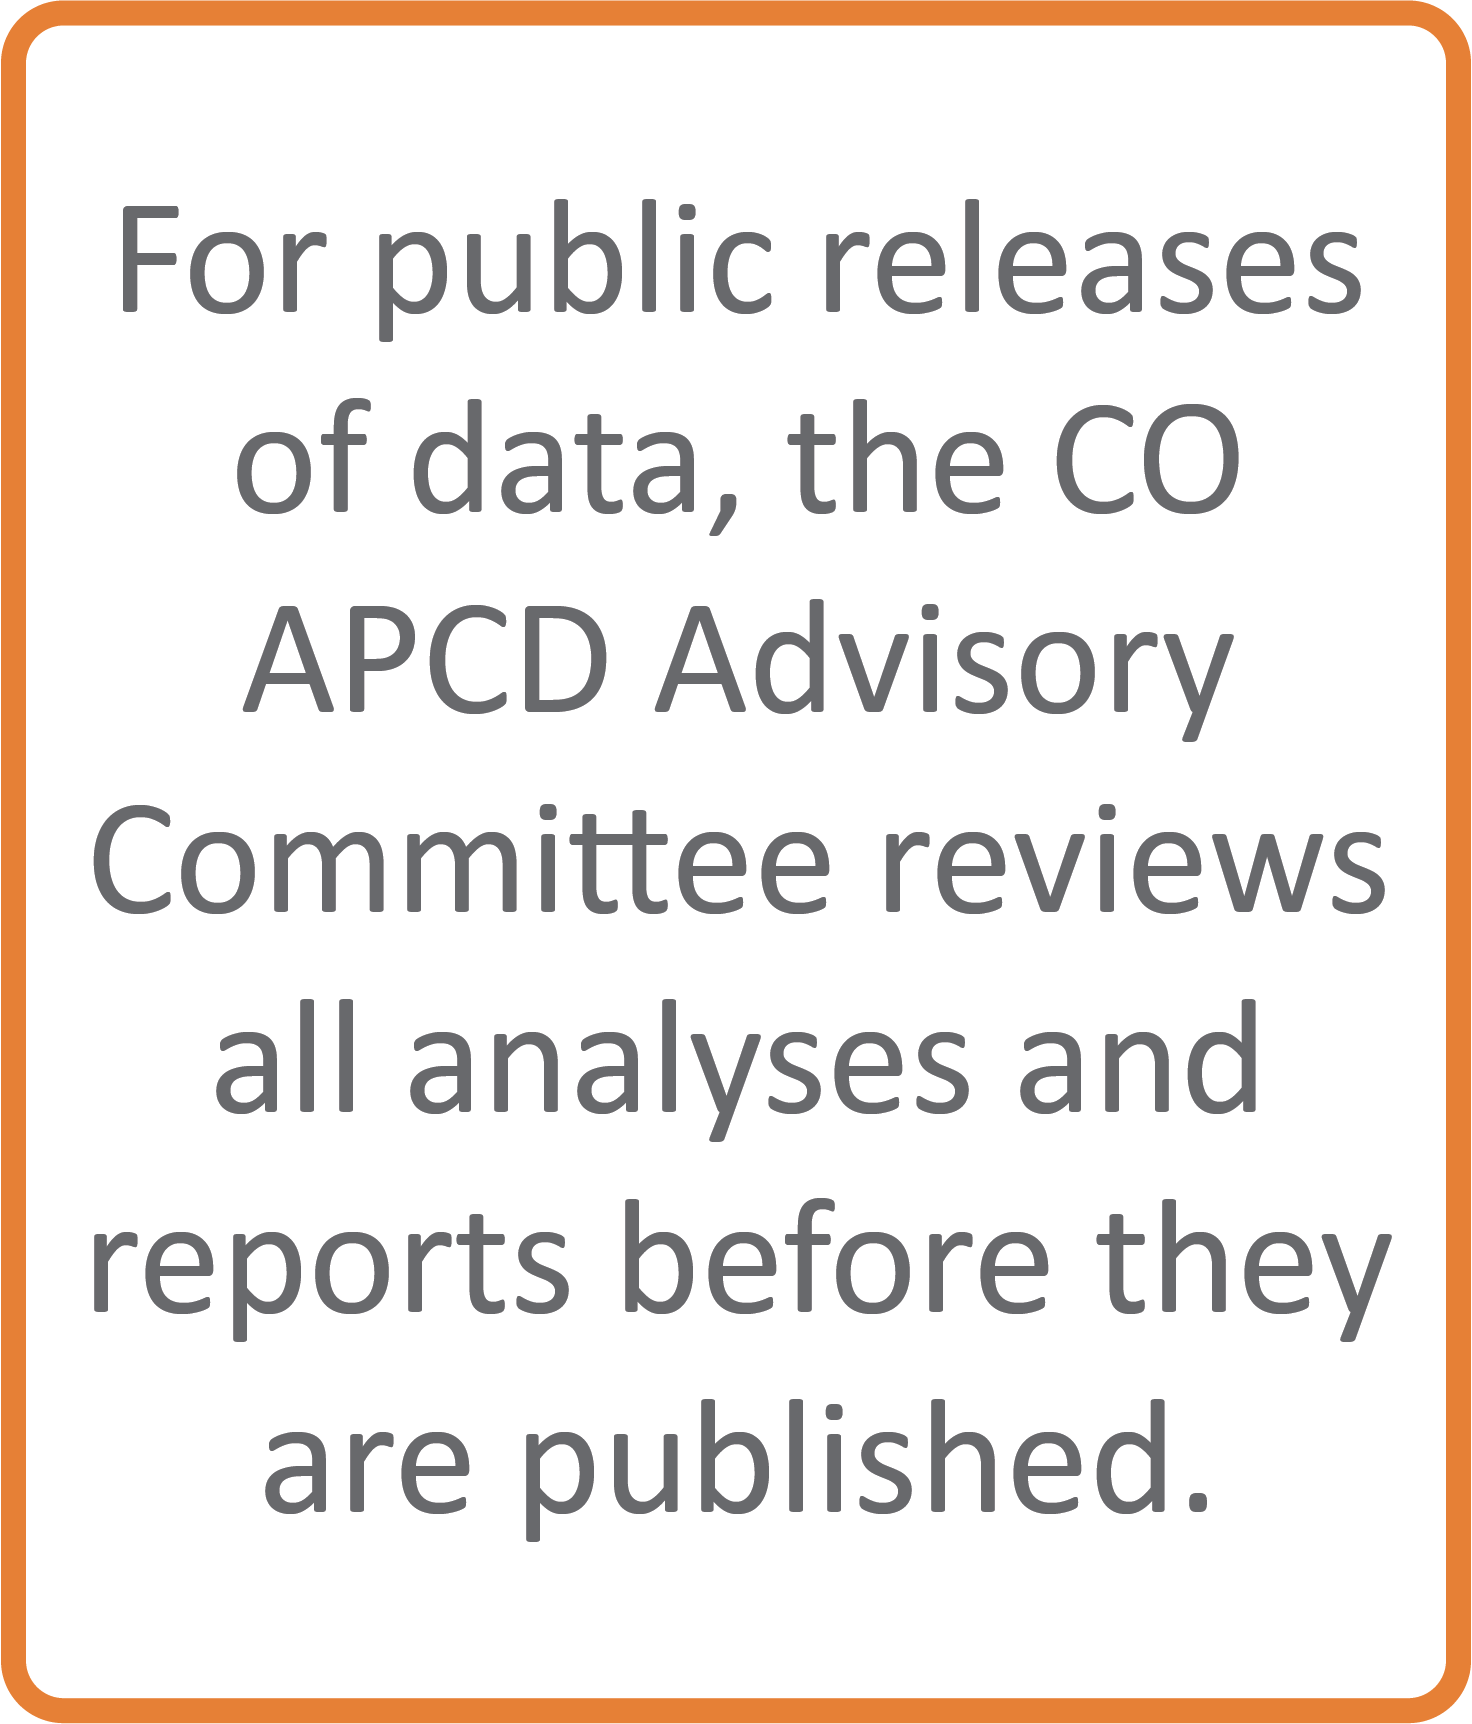 For public releases of data, the CO APCD Advisory Committee reviews all analyses and reports before they are published. 